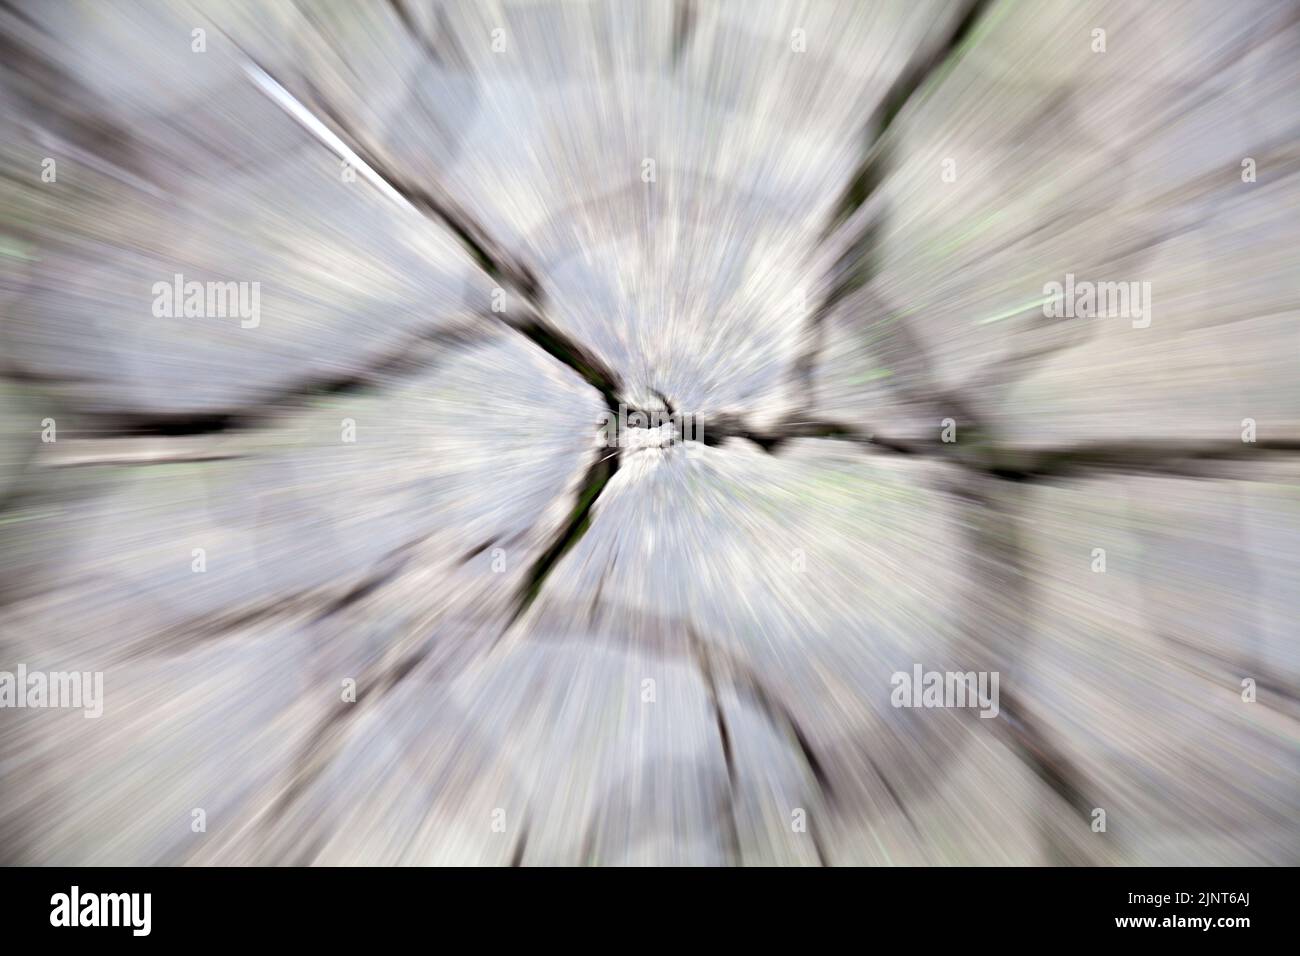 A ICM photo looking down at the cracks in the mud at the Snake Pass end of the Ladybower reservoir, Peak district, UK Stock Photo